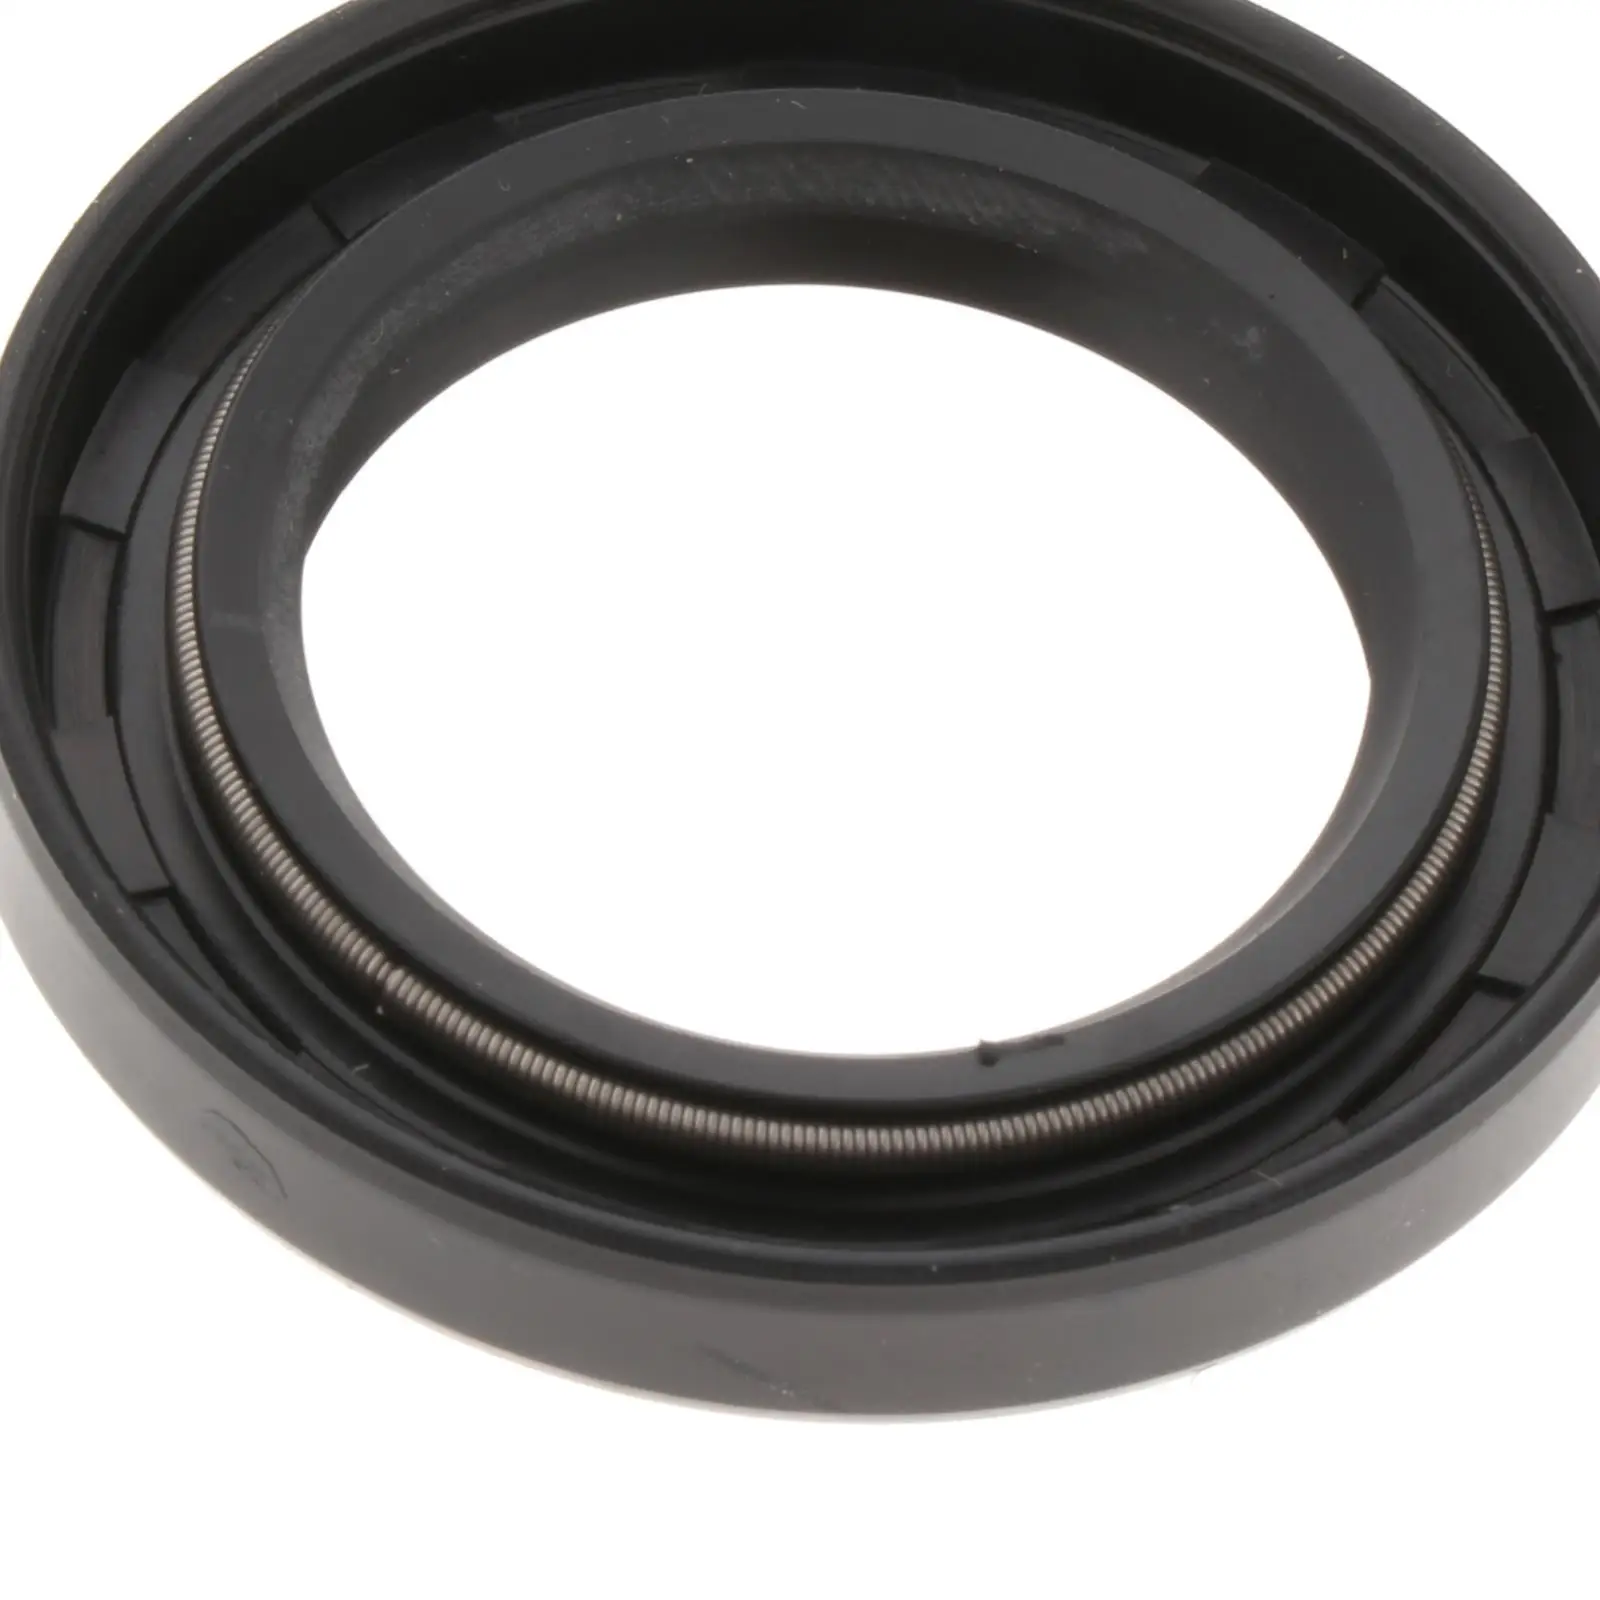 Oil Seal    Outboard Motor 2T 60HP-90HP Accessory Replacement